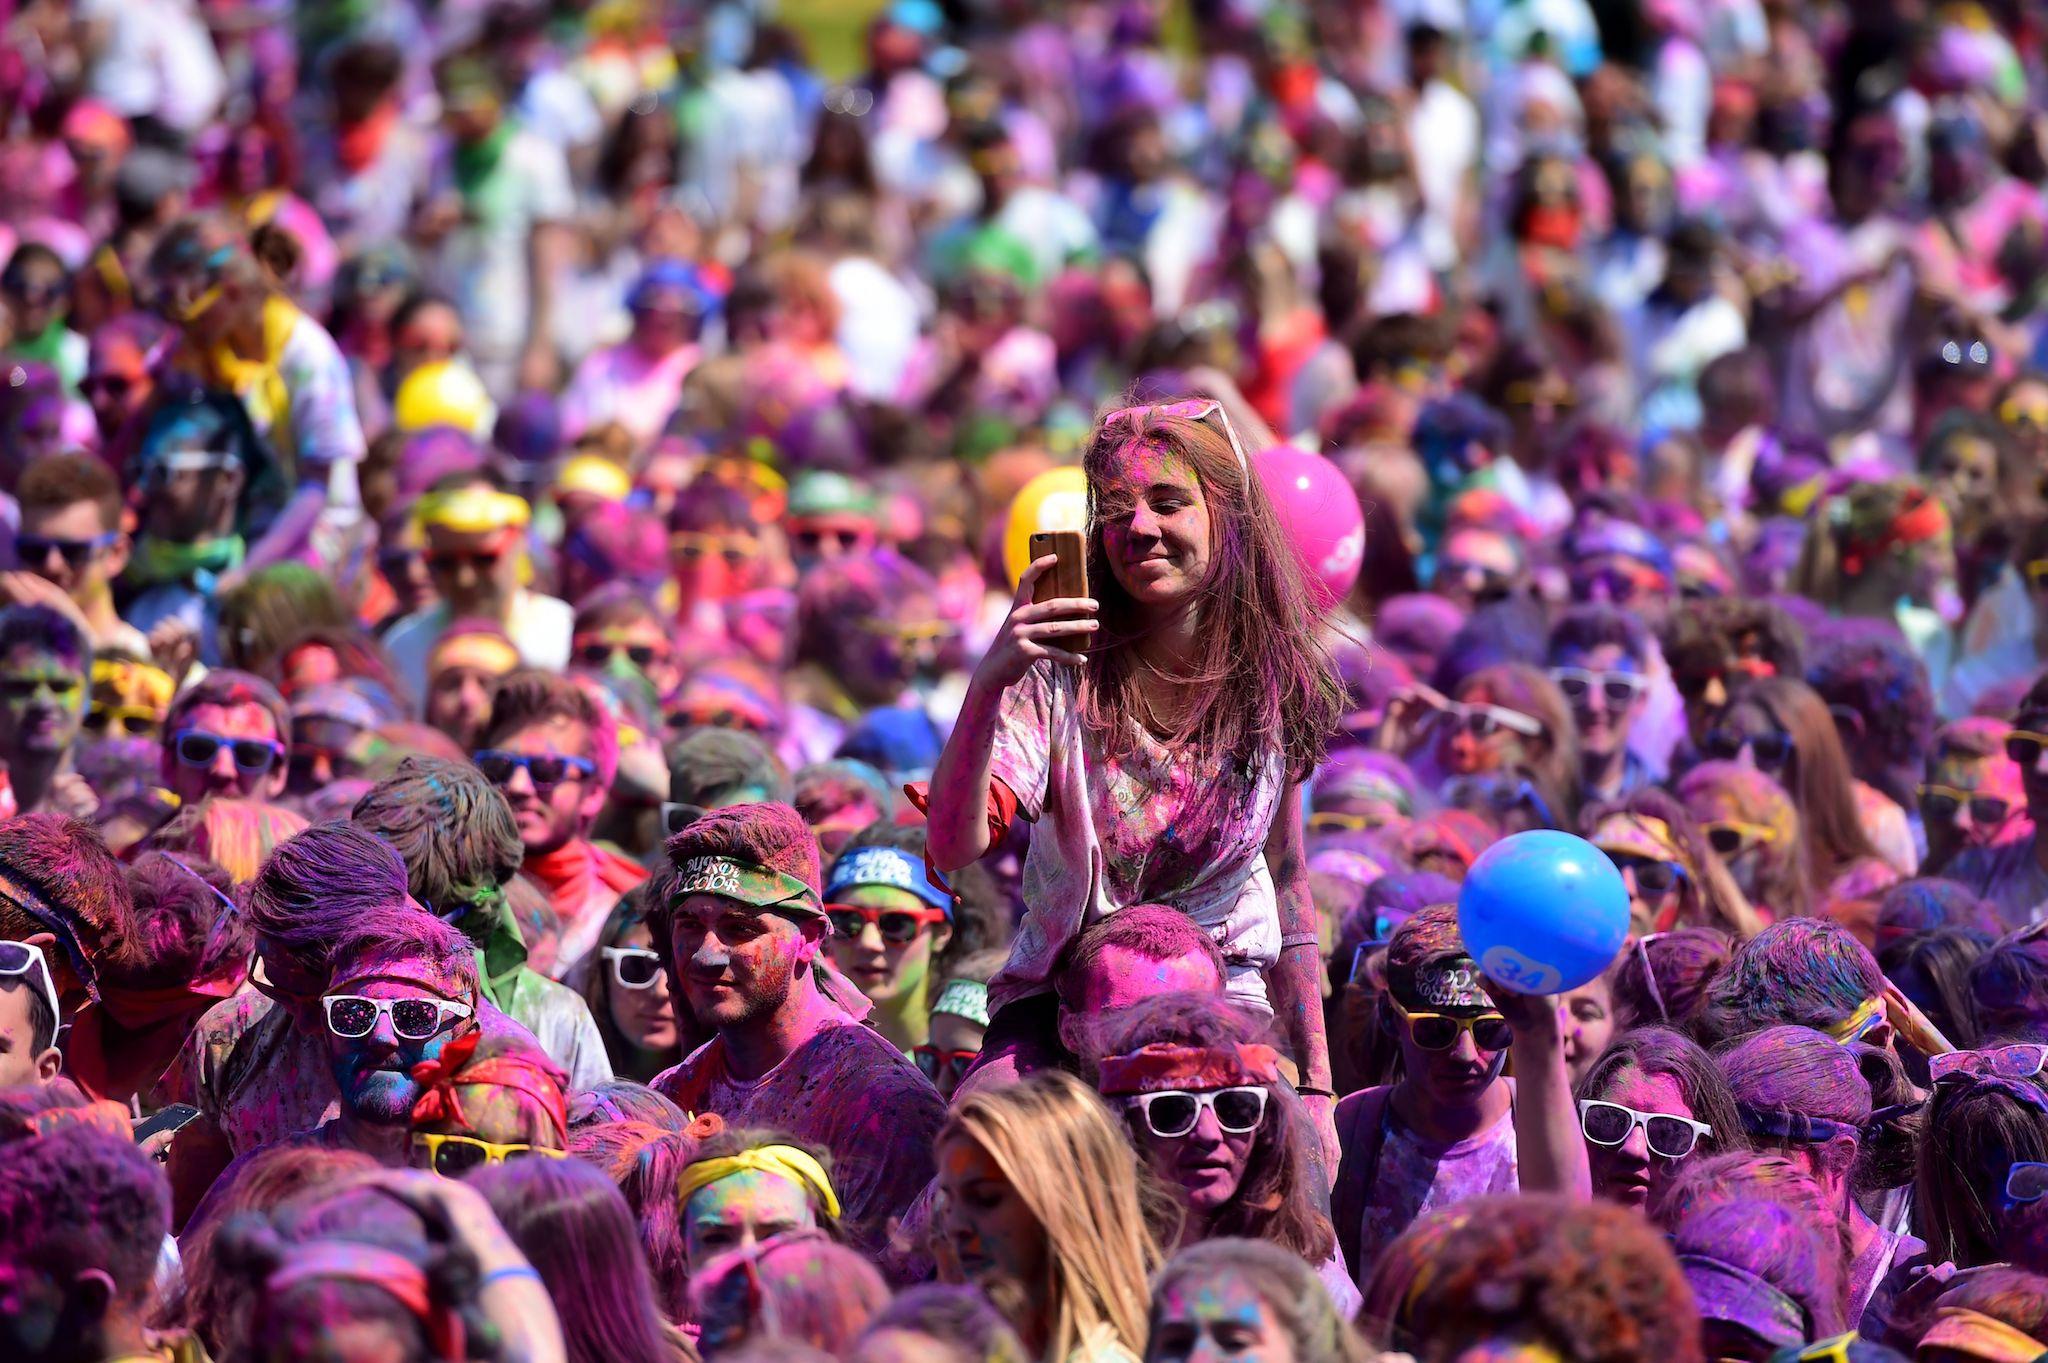 Runners attend a DJ concert after finishing the Burdi Colors race on May 5, 2018 in Pessac, southwestern France